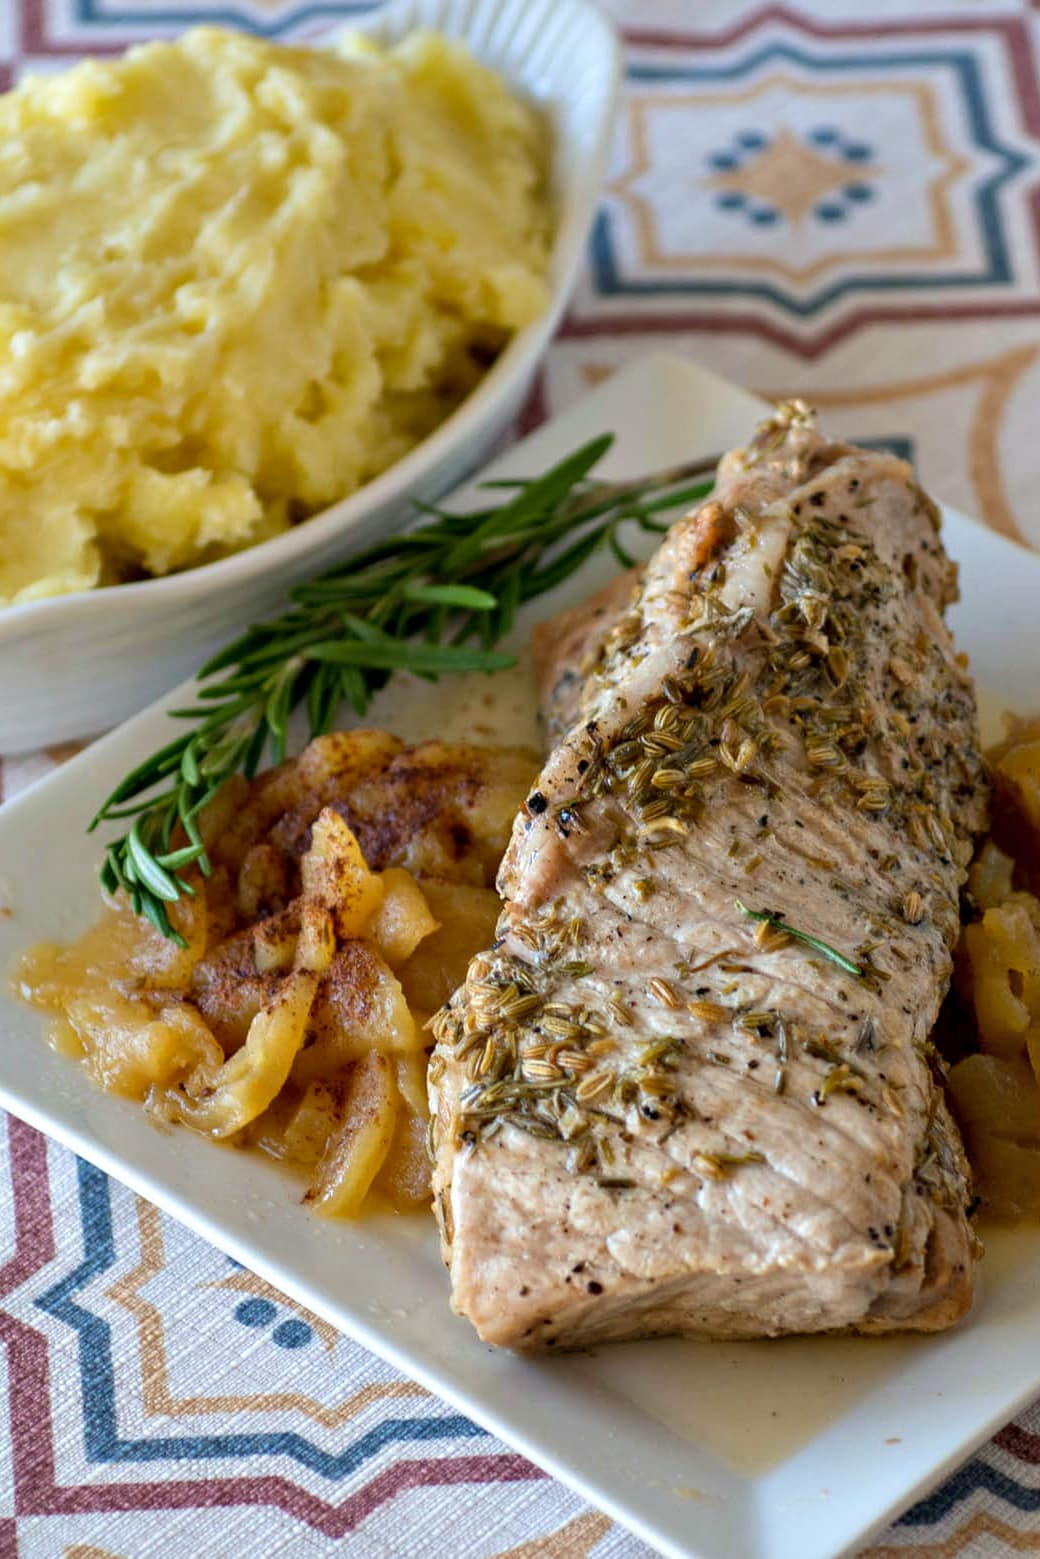 Pork Loin In The Instant Pot
 Instant Pot Pork Loin with Apples and Mashed Potatoes